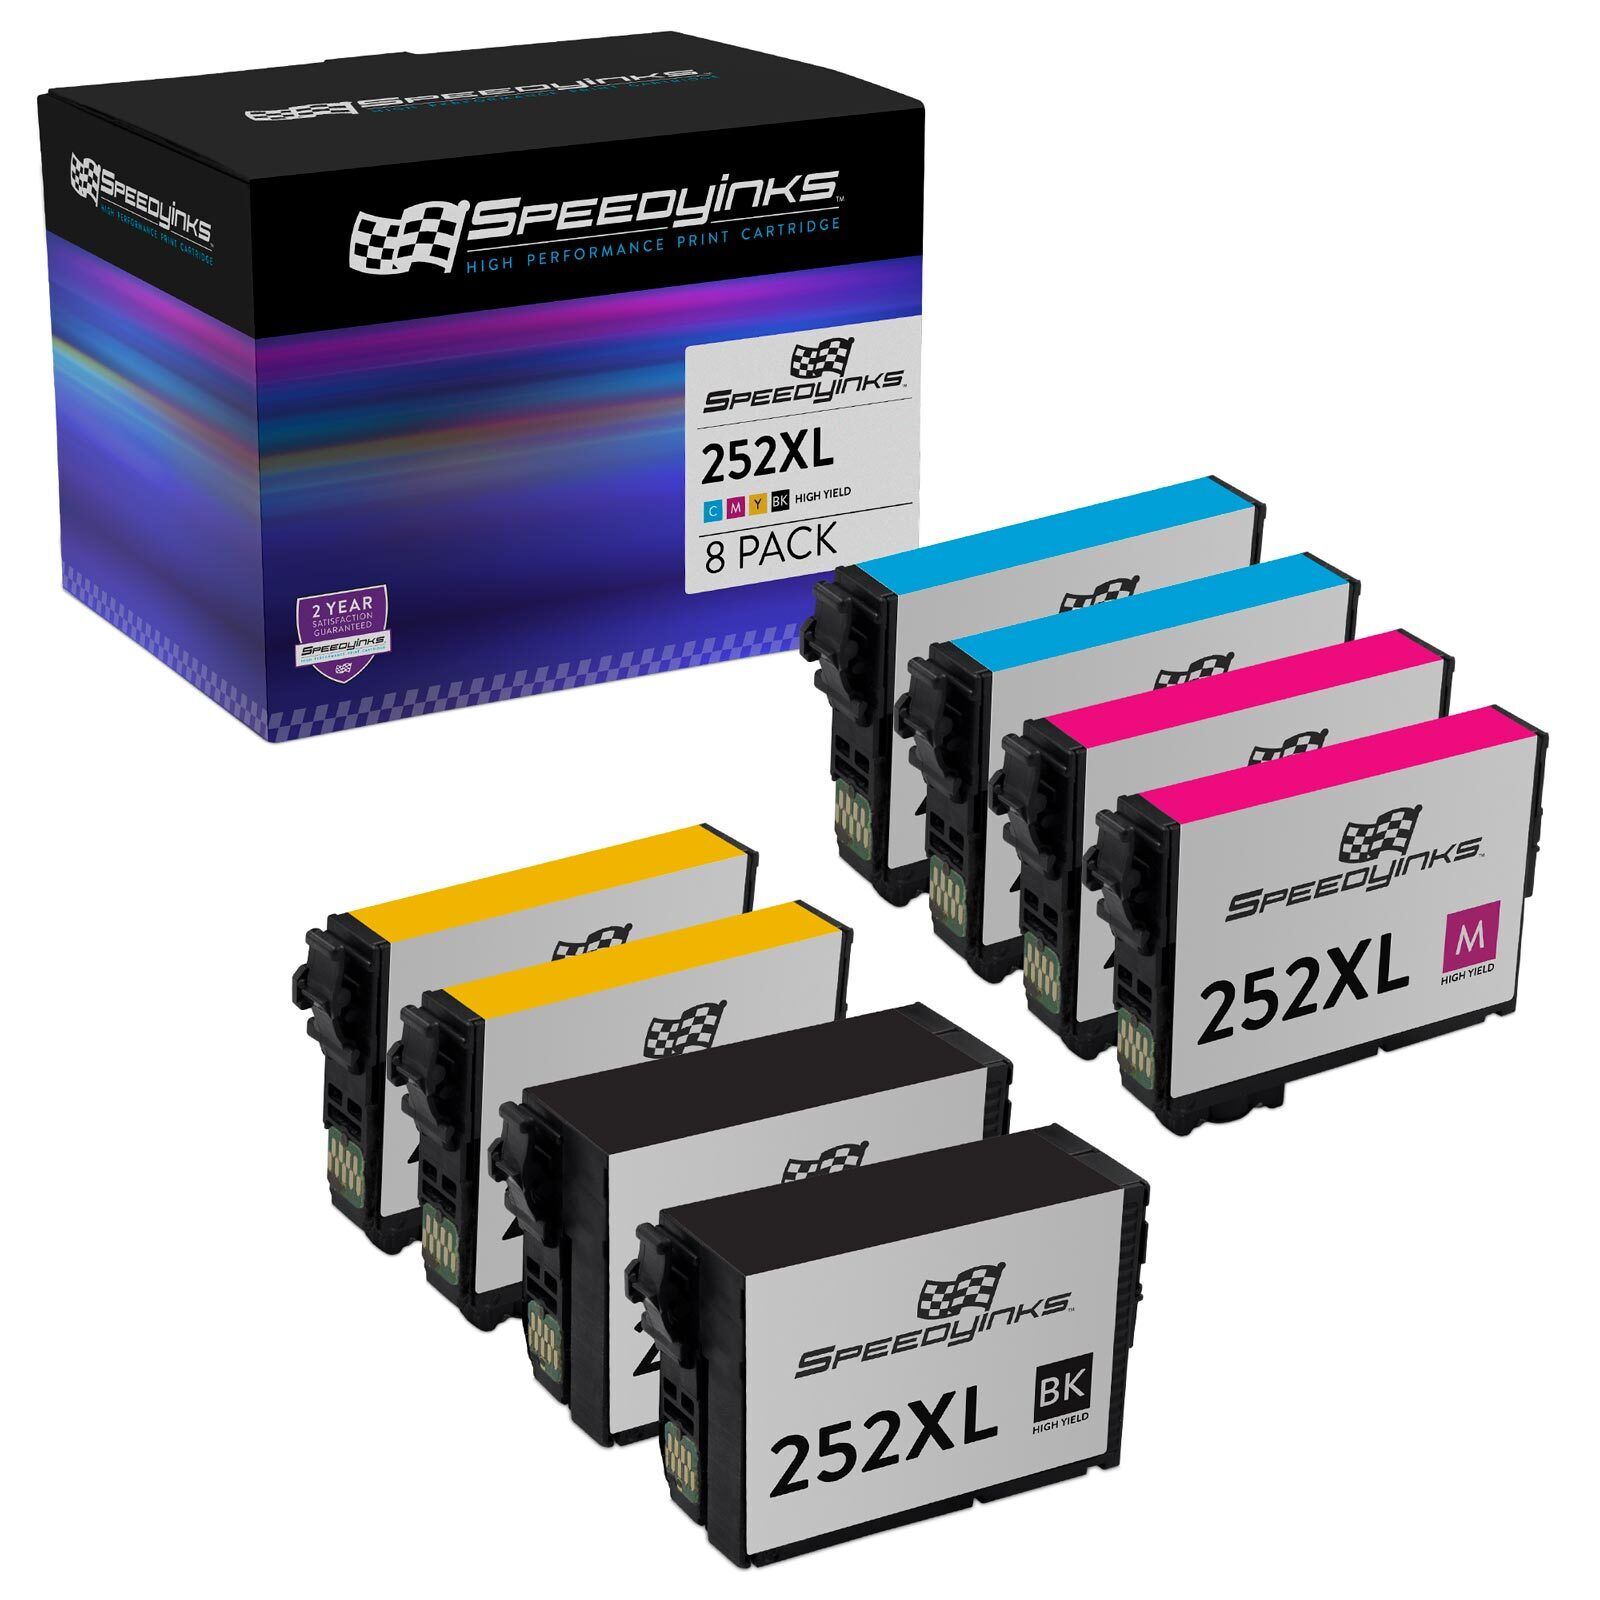 SPEEDYINKS Replacements for Epson 252XL HY Ink Cartridges (Multicolor 8-Pack)